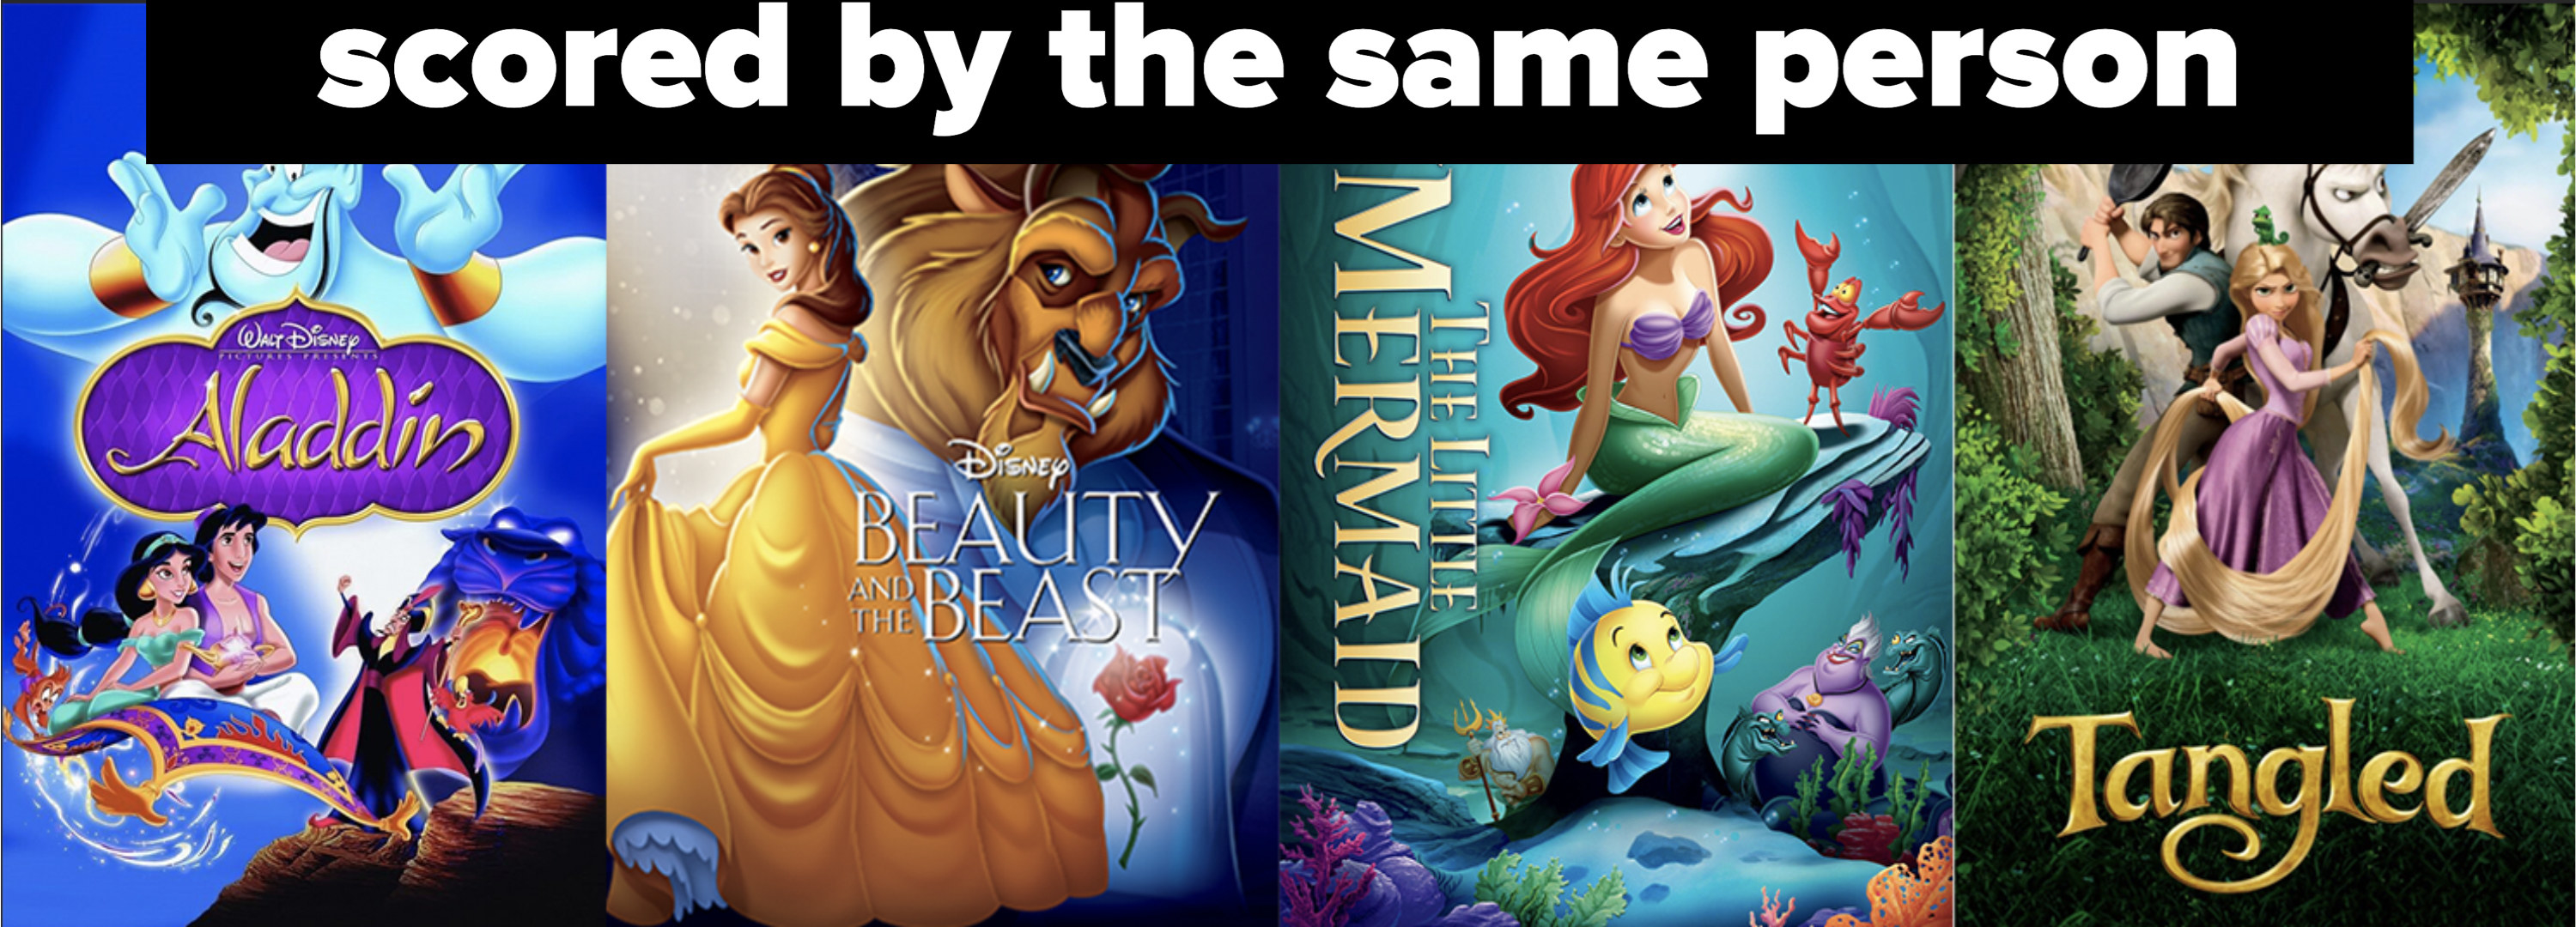 posters for Aladdin, Beauty and the Beast, The Little Mermaid, and Tangled, with the words &quot;scored by the same person&quot;